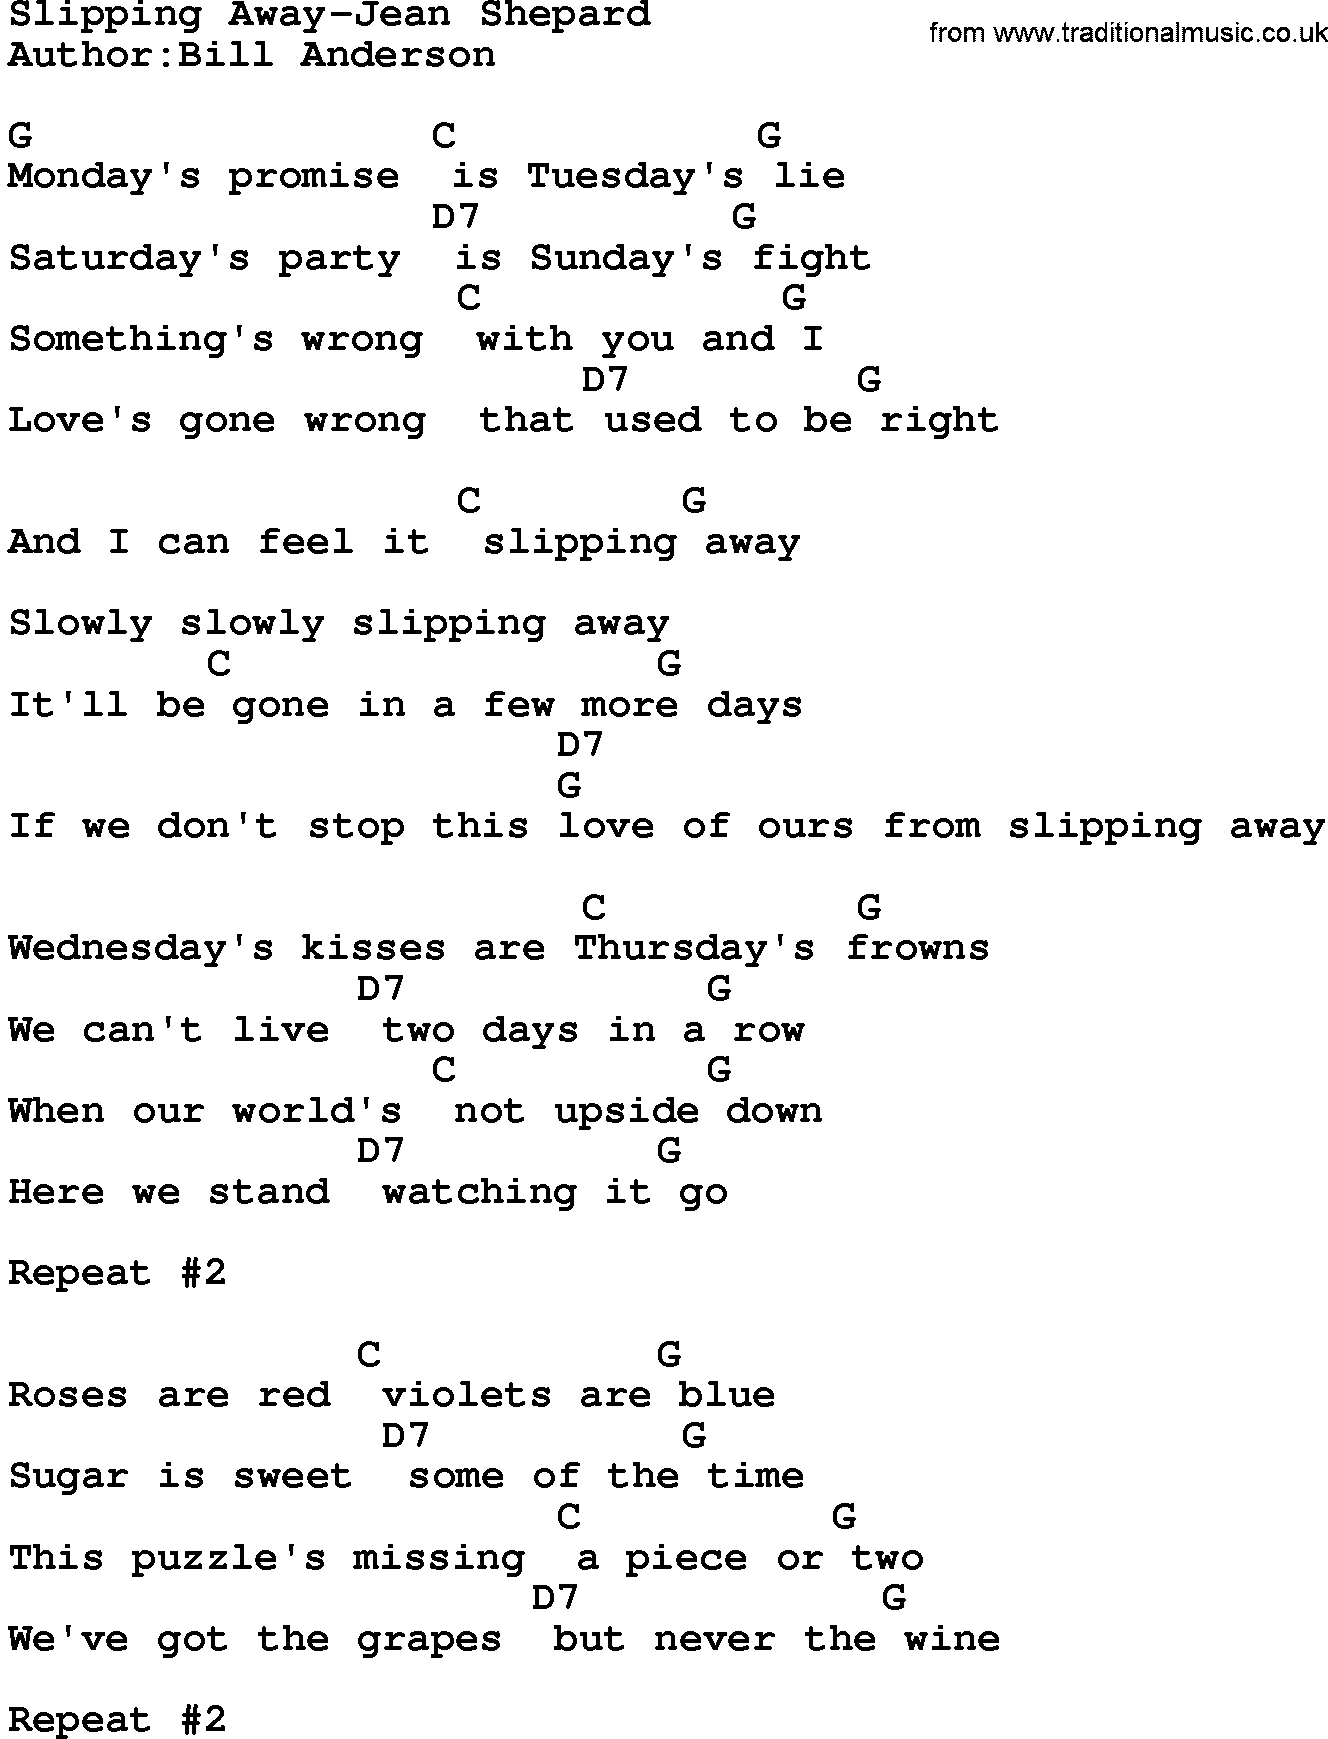 Country music song: Slipping Away-Jean Shepard lyrics and chords